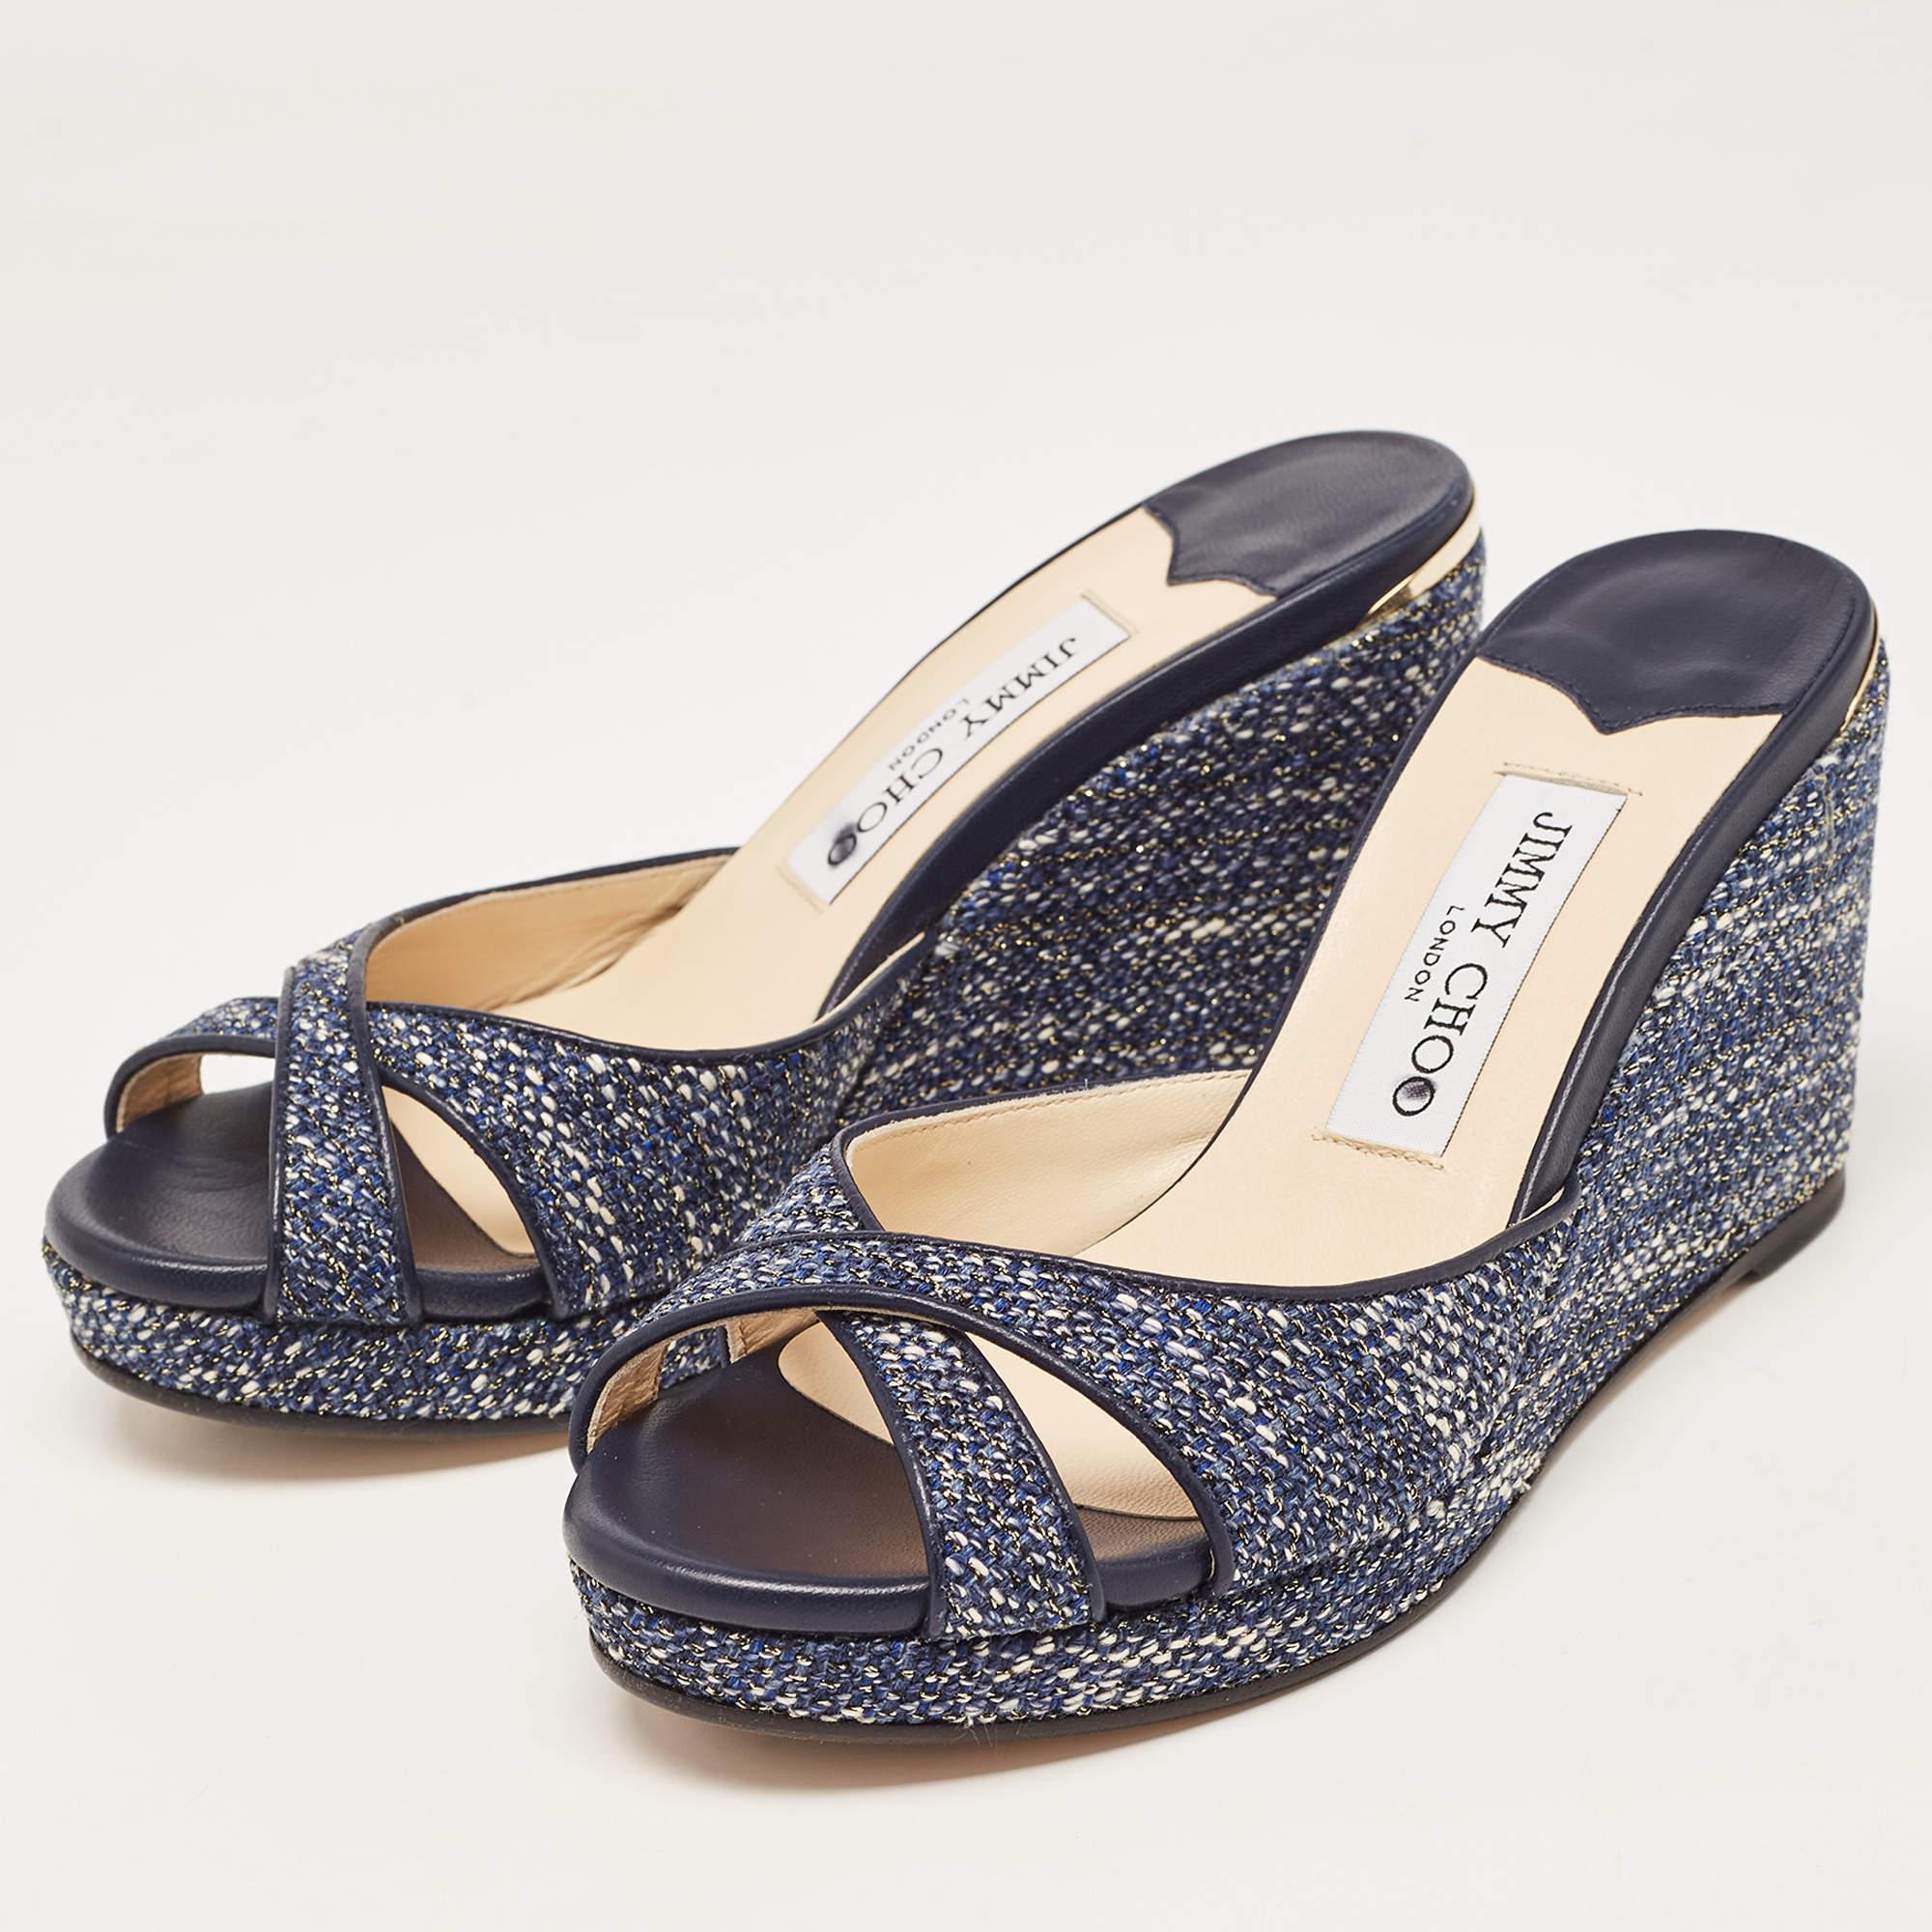 The Jimmy Choo sandals feature a sophisticated blend of navy blue tweed and leather. With a stylish wedge heel, they offer both elegance and comfort for any occasion.

